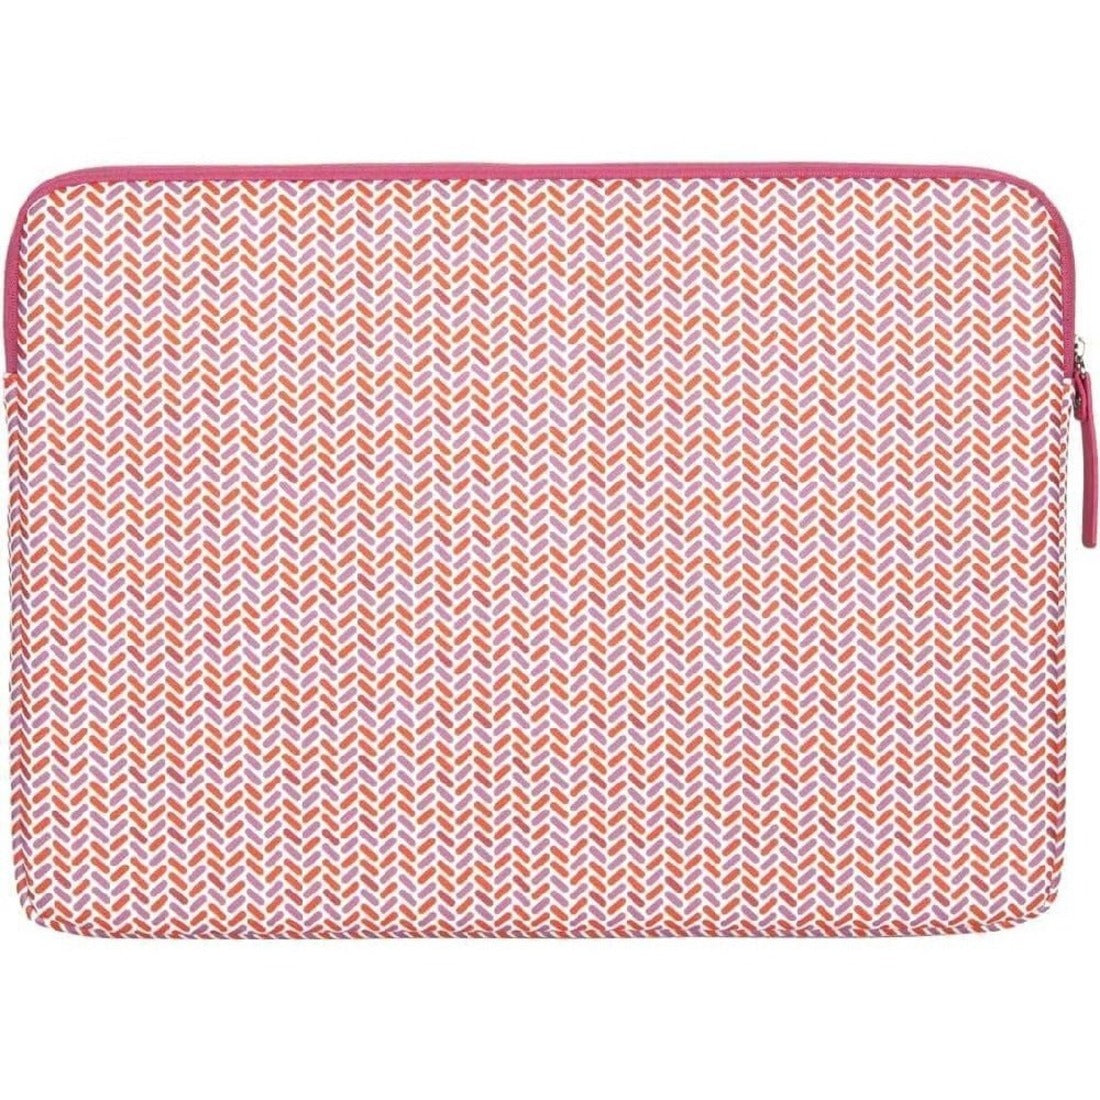 Targus Arts Edition TBS93903GL Carrying Case (Sleeve) for 13" to 14" Notebook - Pink